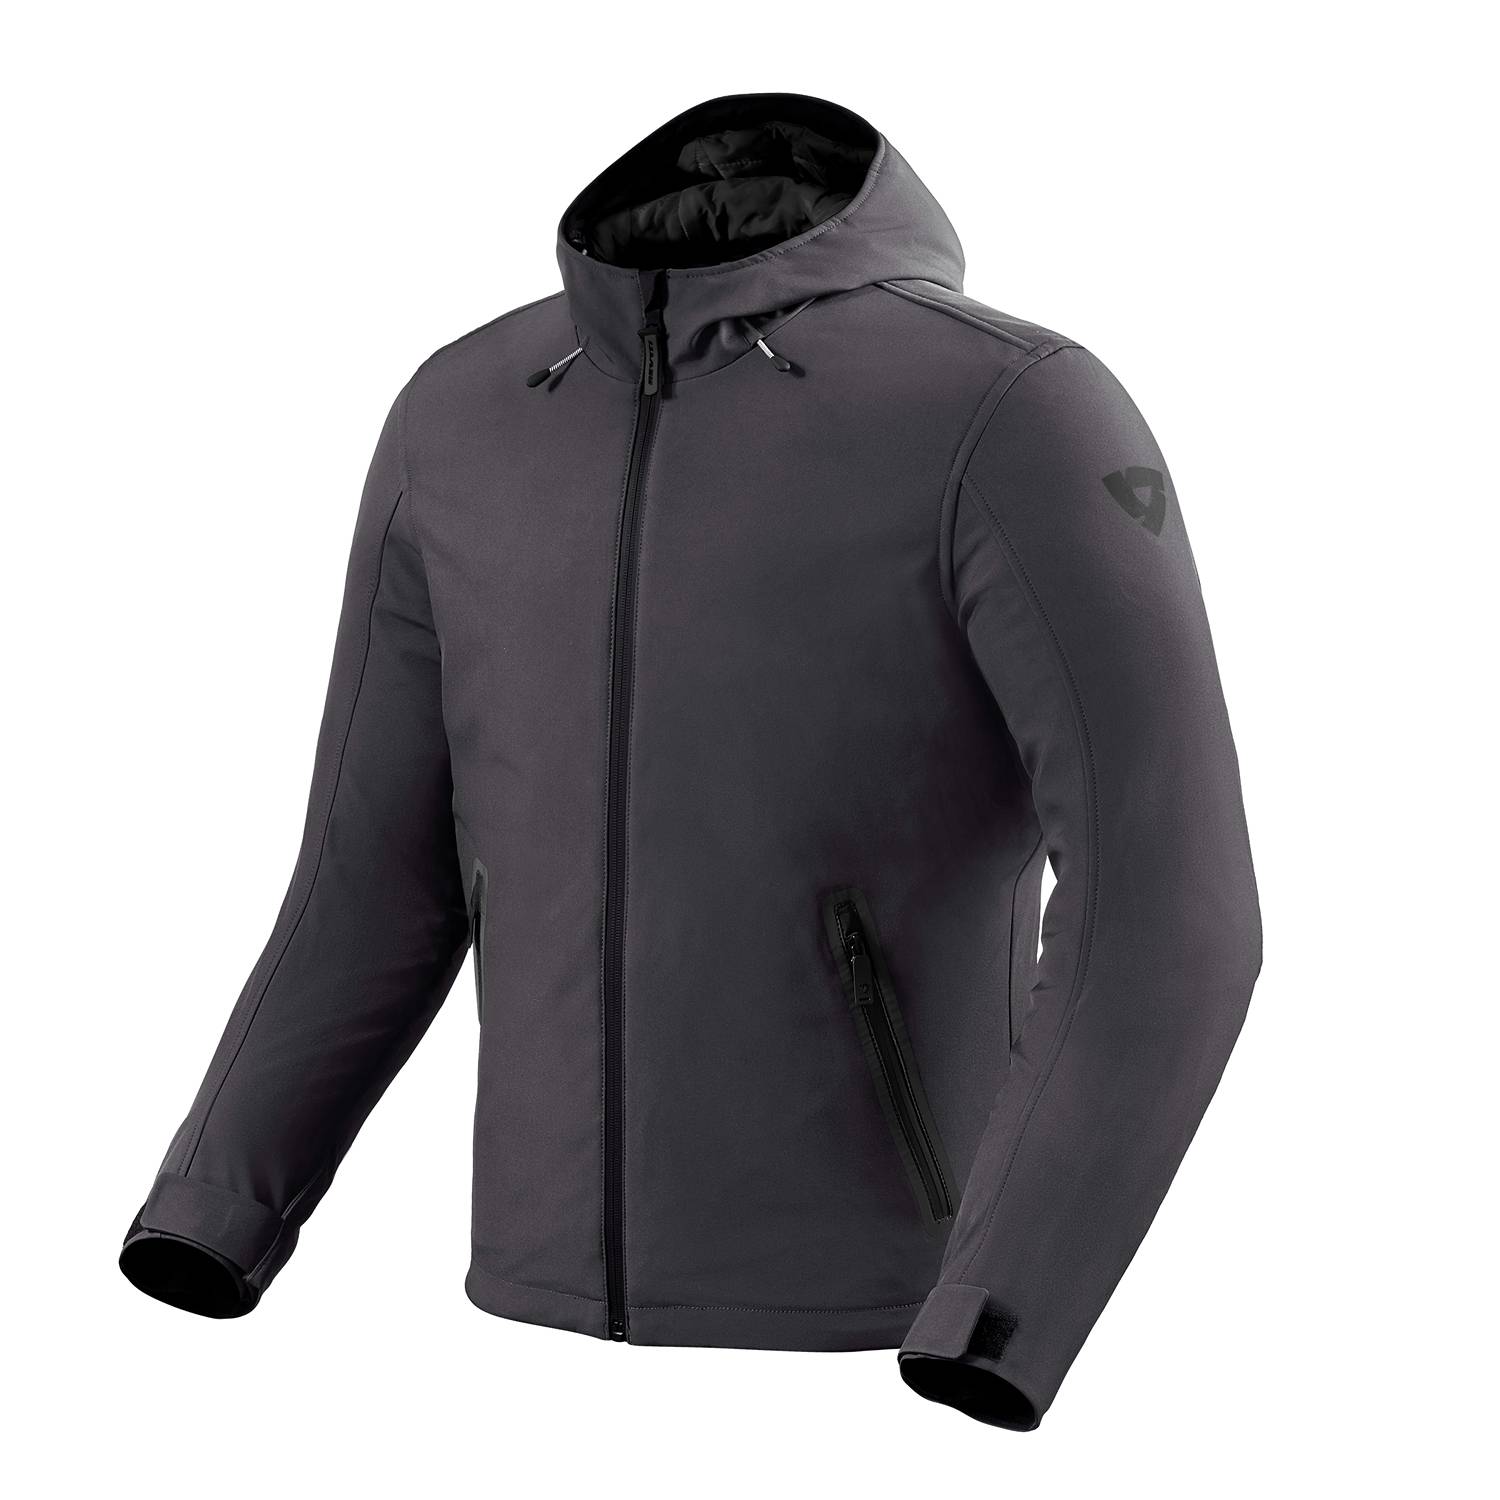 Image of REV'IT! Traffic H2O Veste Anthracite Taille S